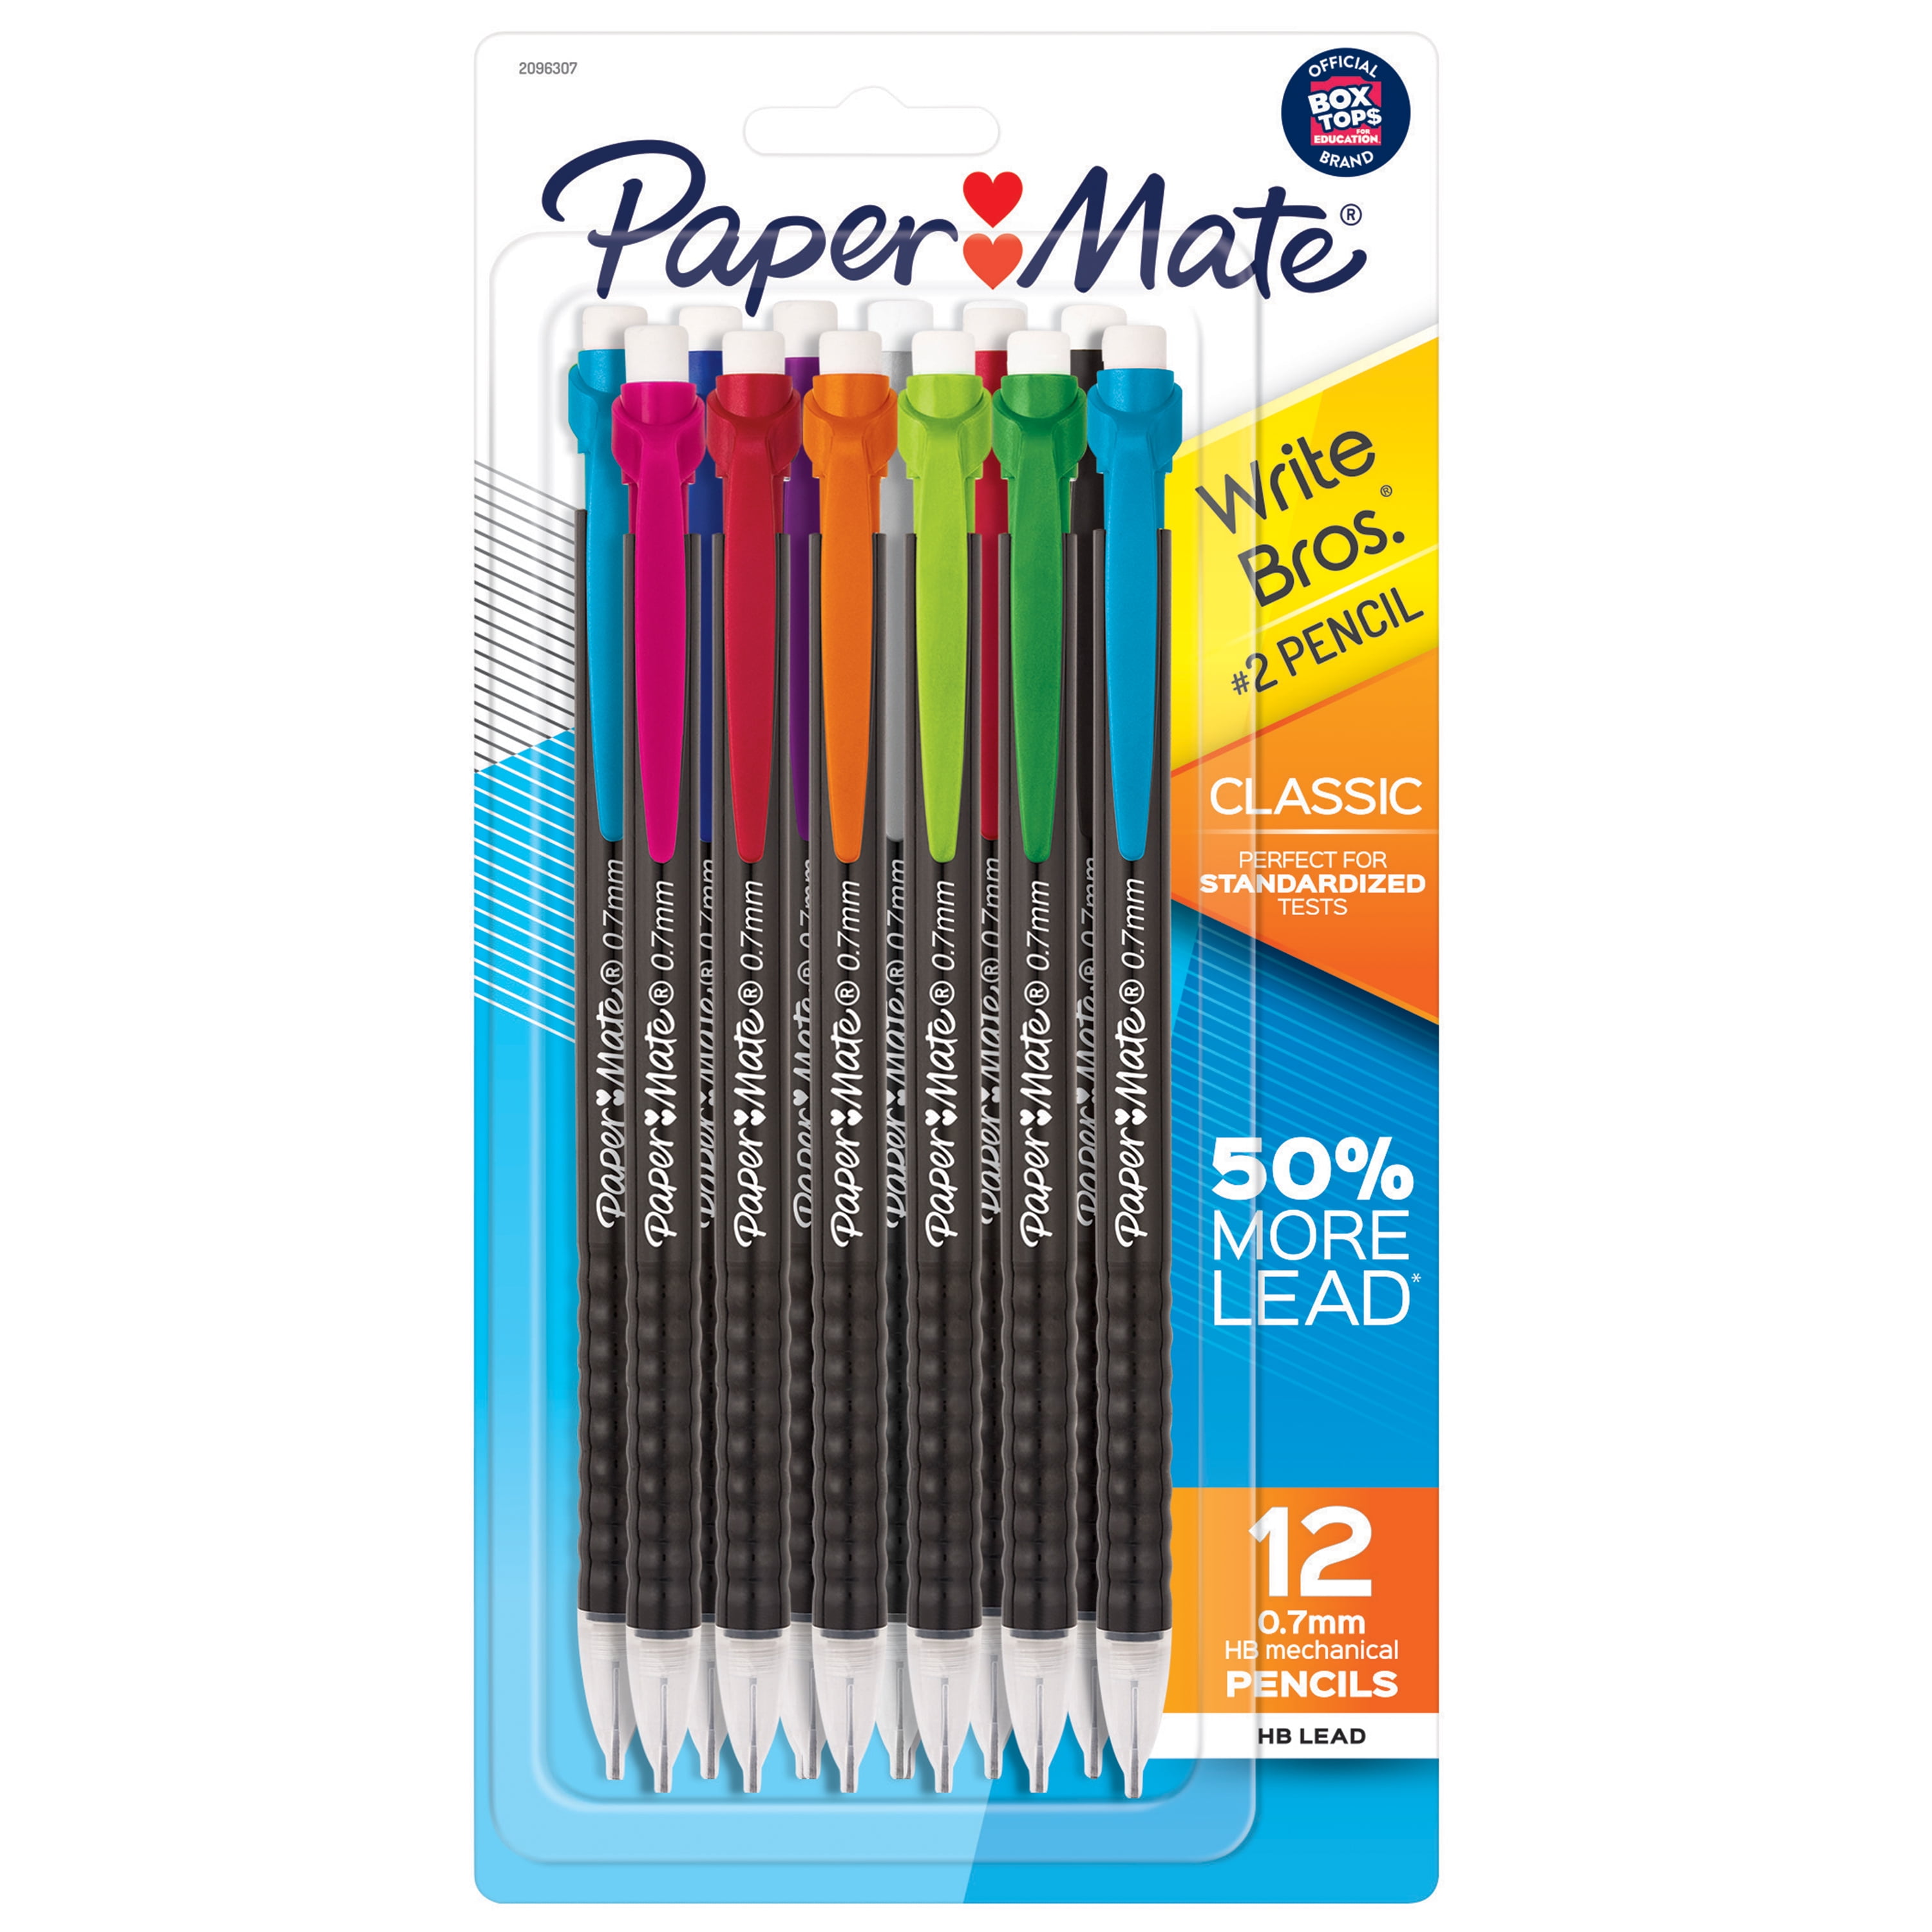 Paper Mate Papermate American Classic #2 Wood Pencils 10 Count 